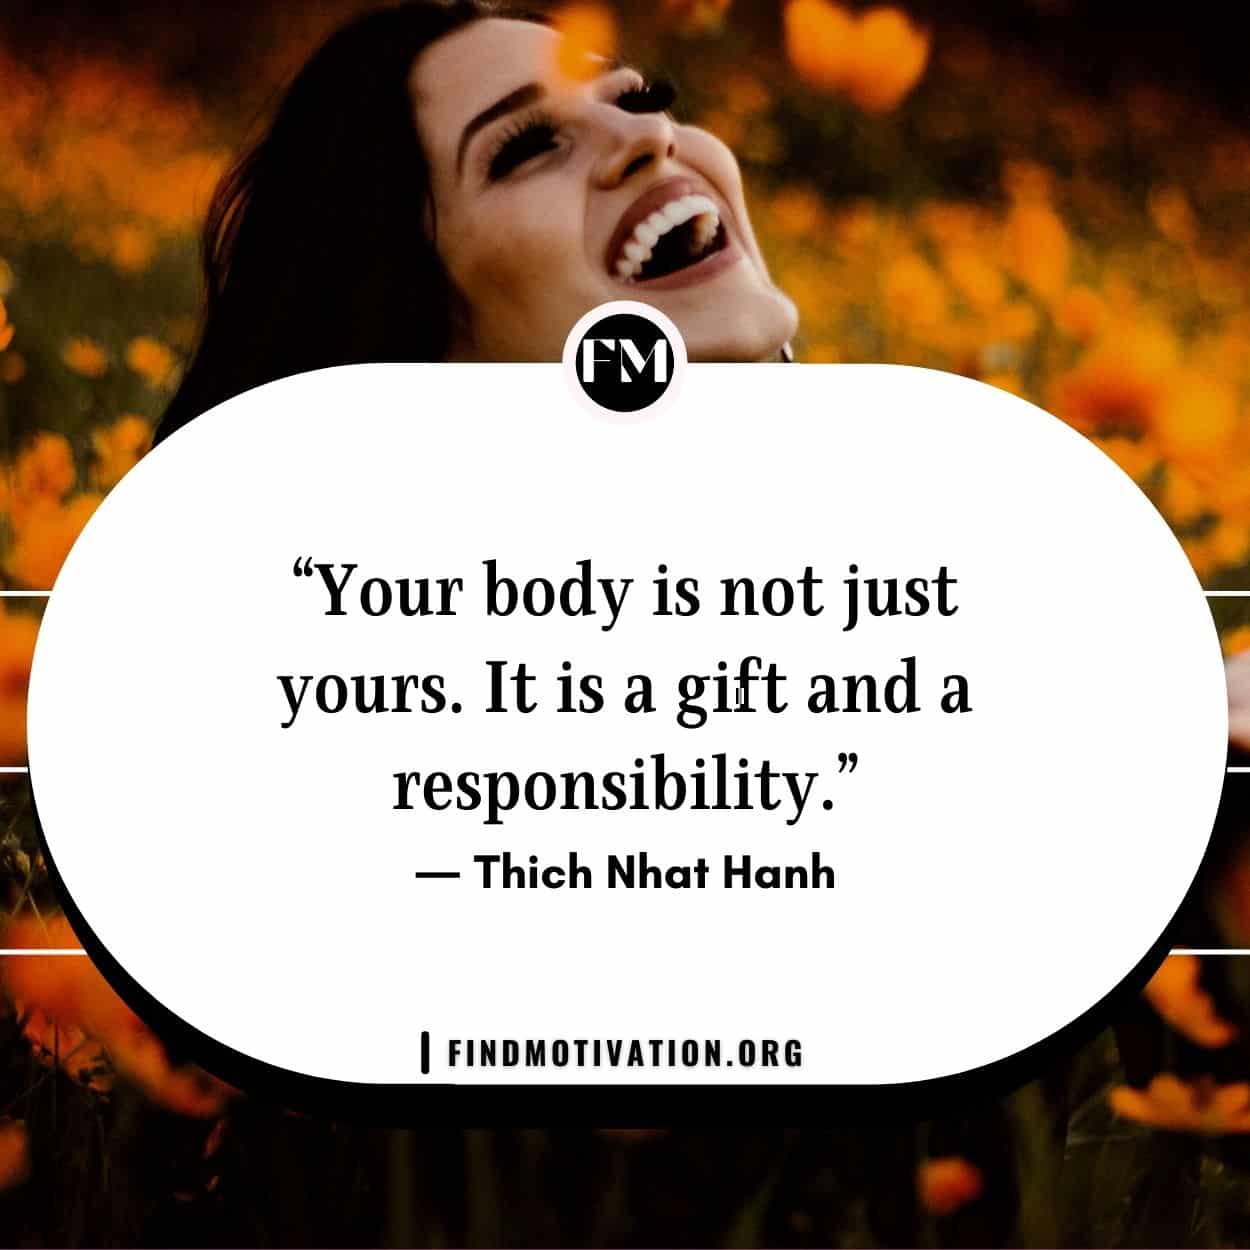 Motivational healthy living quotes to keep your mind and body healthy